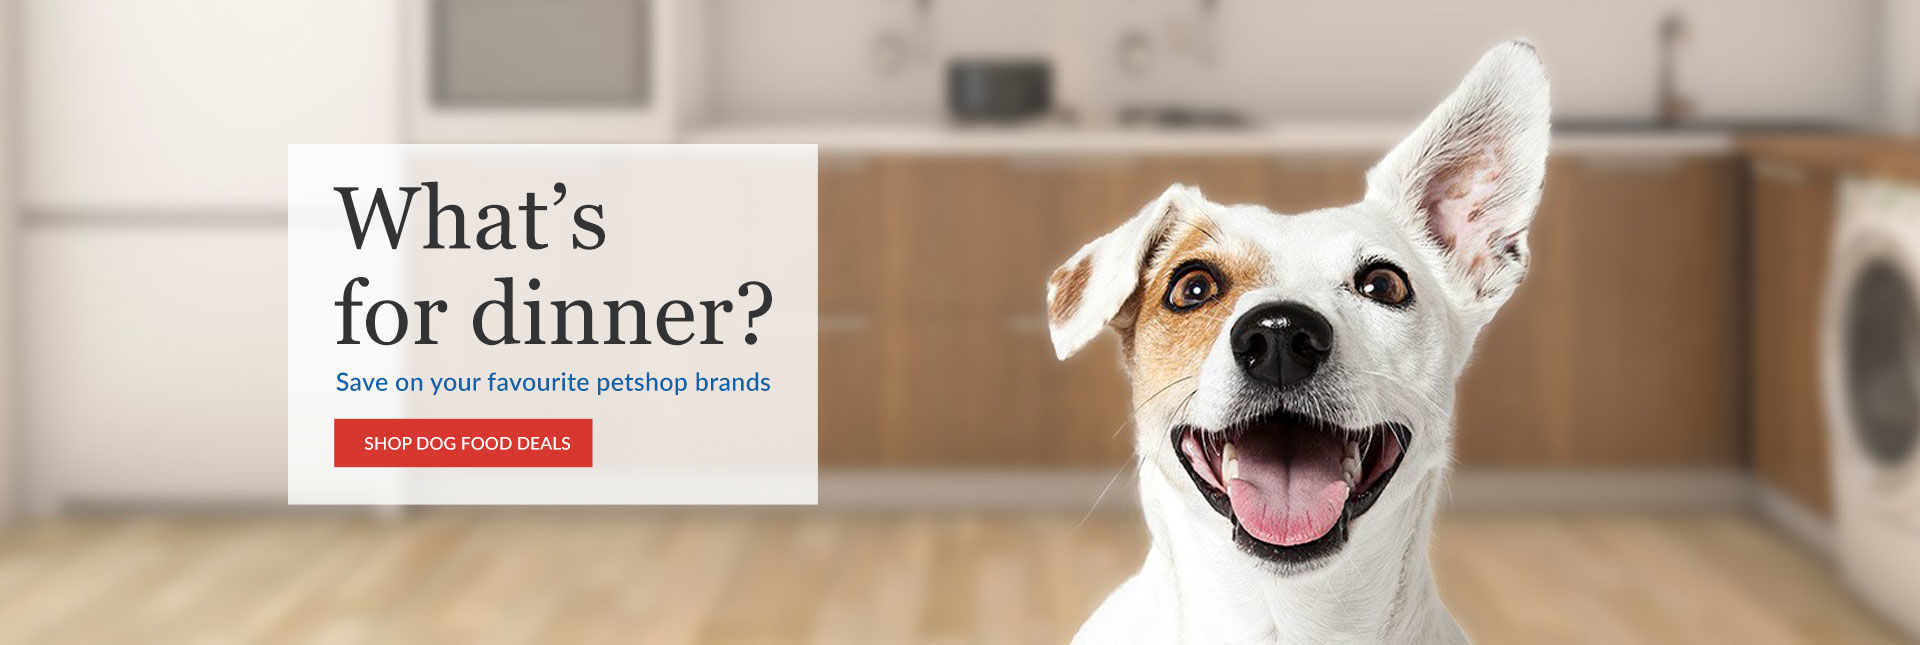 Rokers, Save on Animal Feed, Pet Supplies & Big Pet Shop Brands